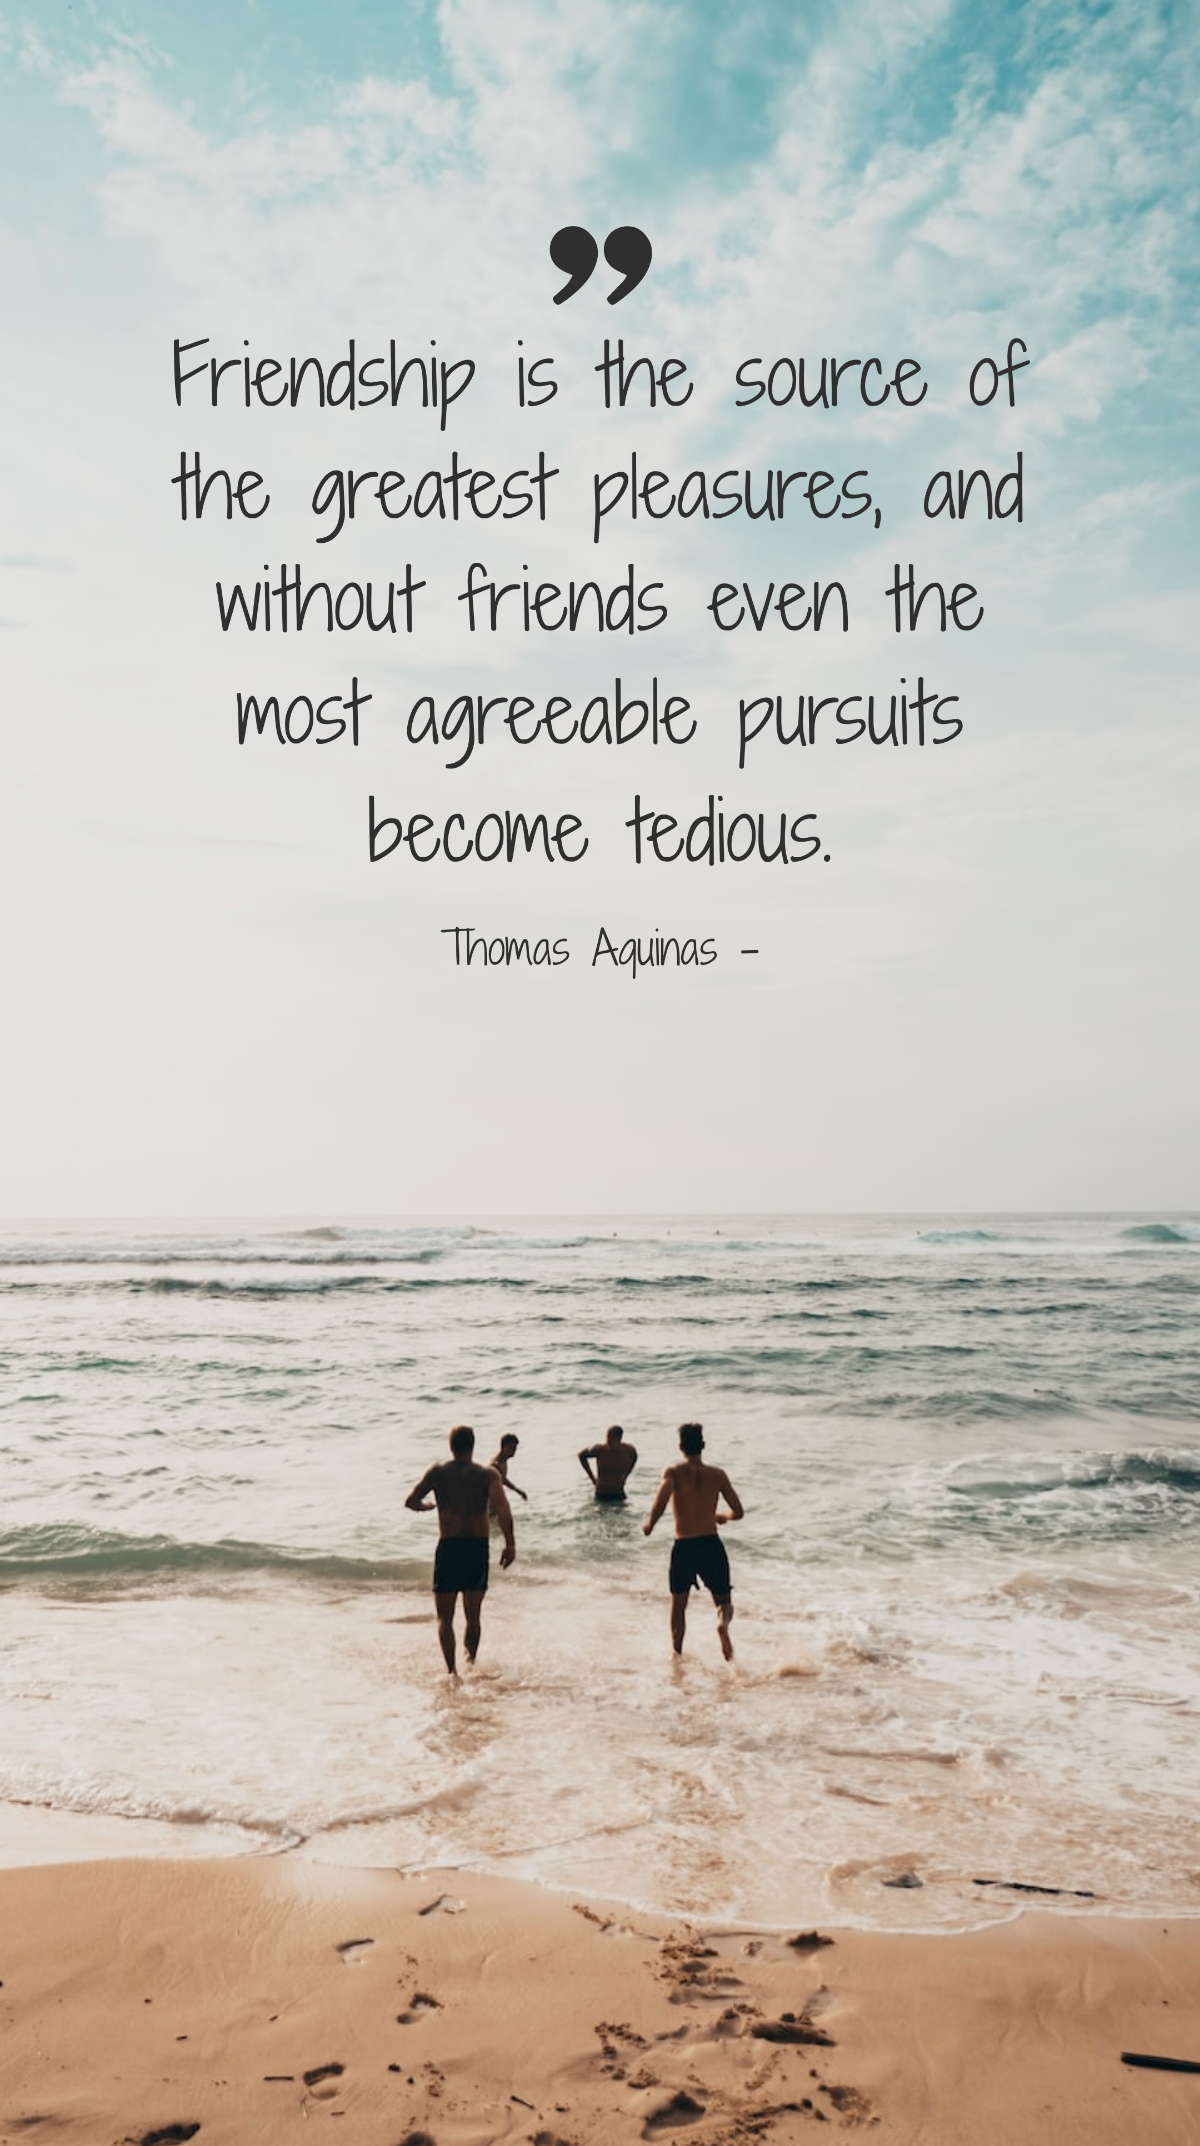 Thomas Aquinas - Friendship is the source of the greatest pleasures, and without friends even the most agreeable pursuits become tedious. Template